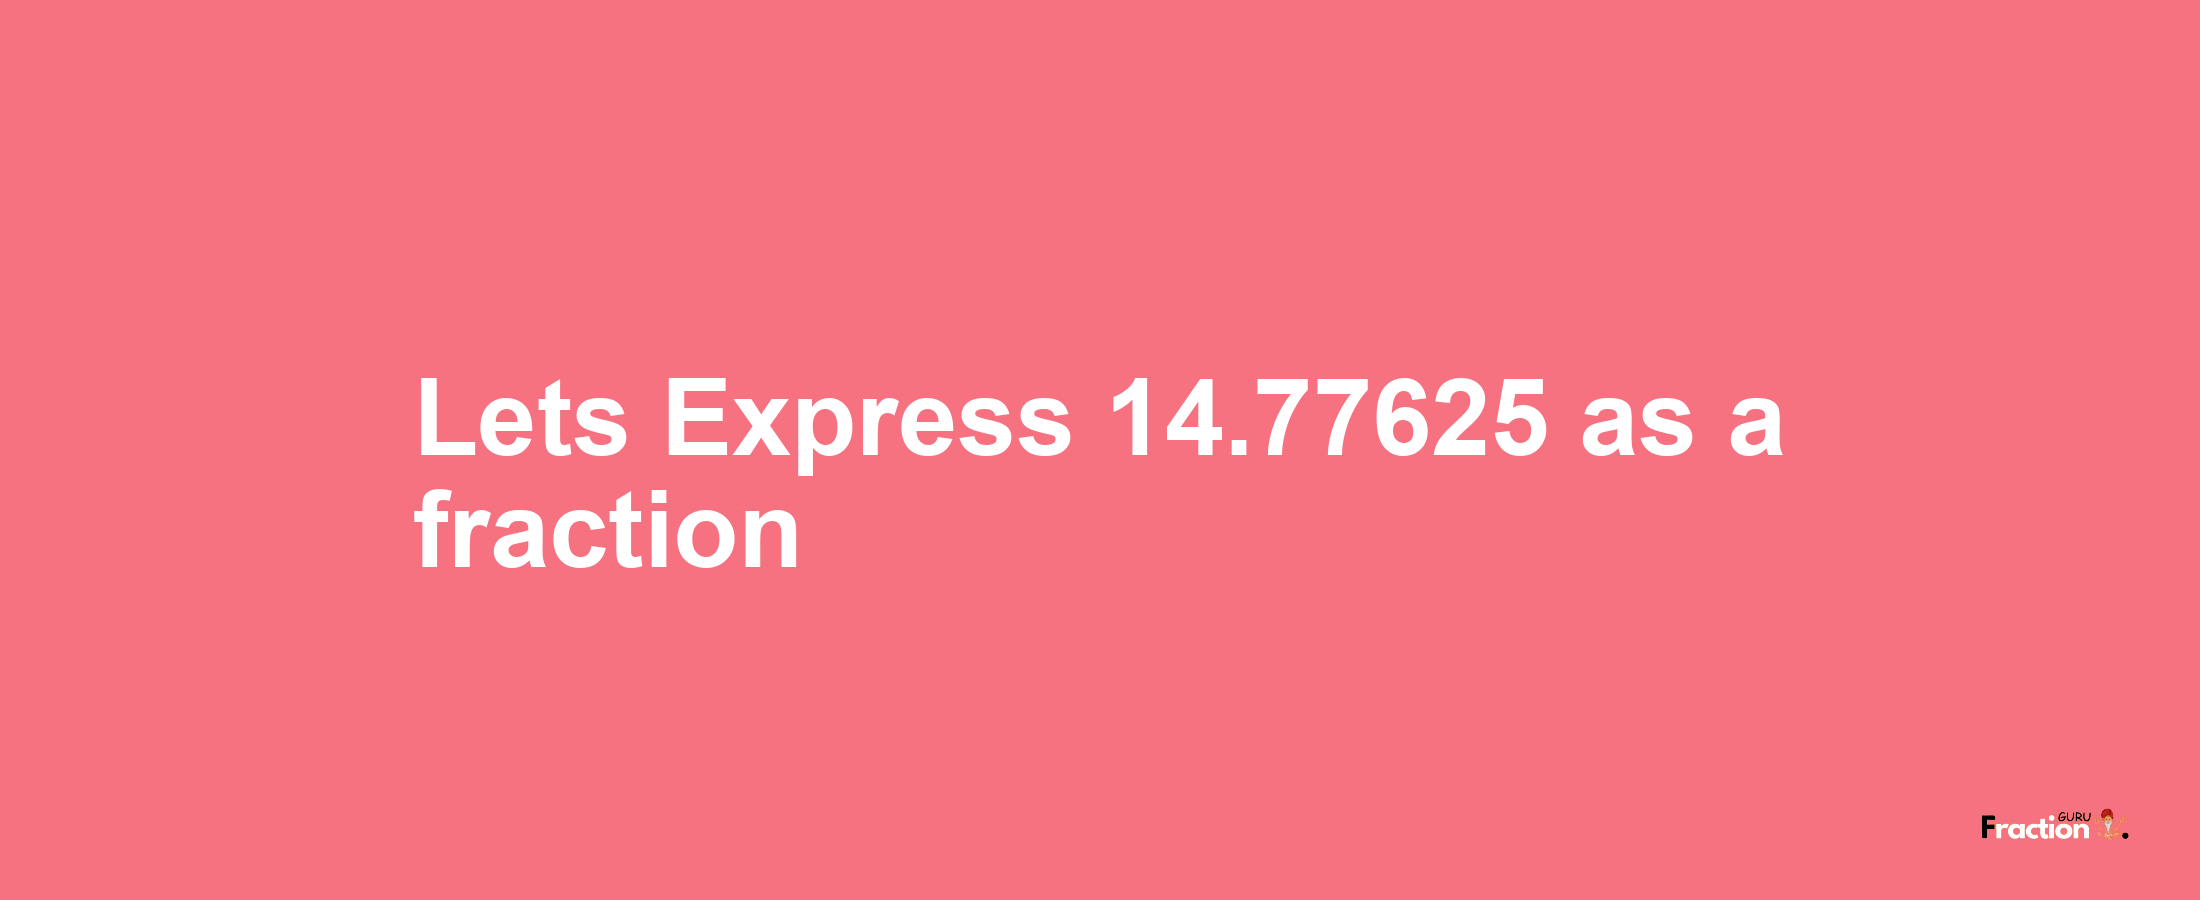 Lets Express 14.77625 as afraction